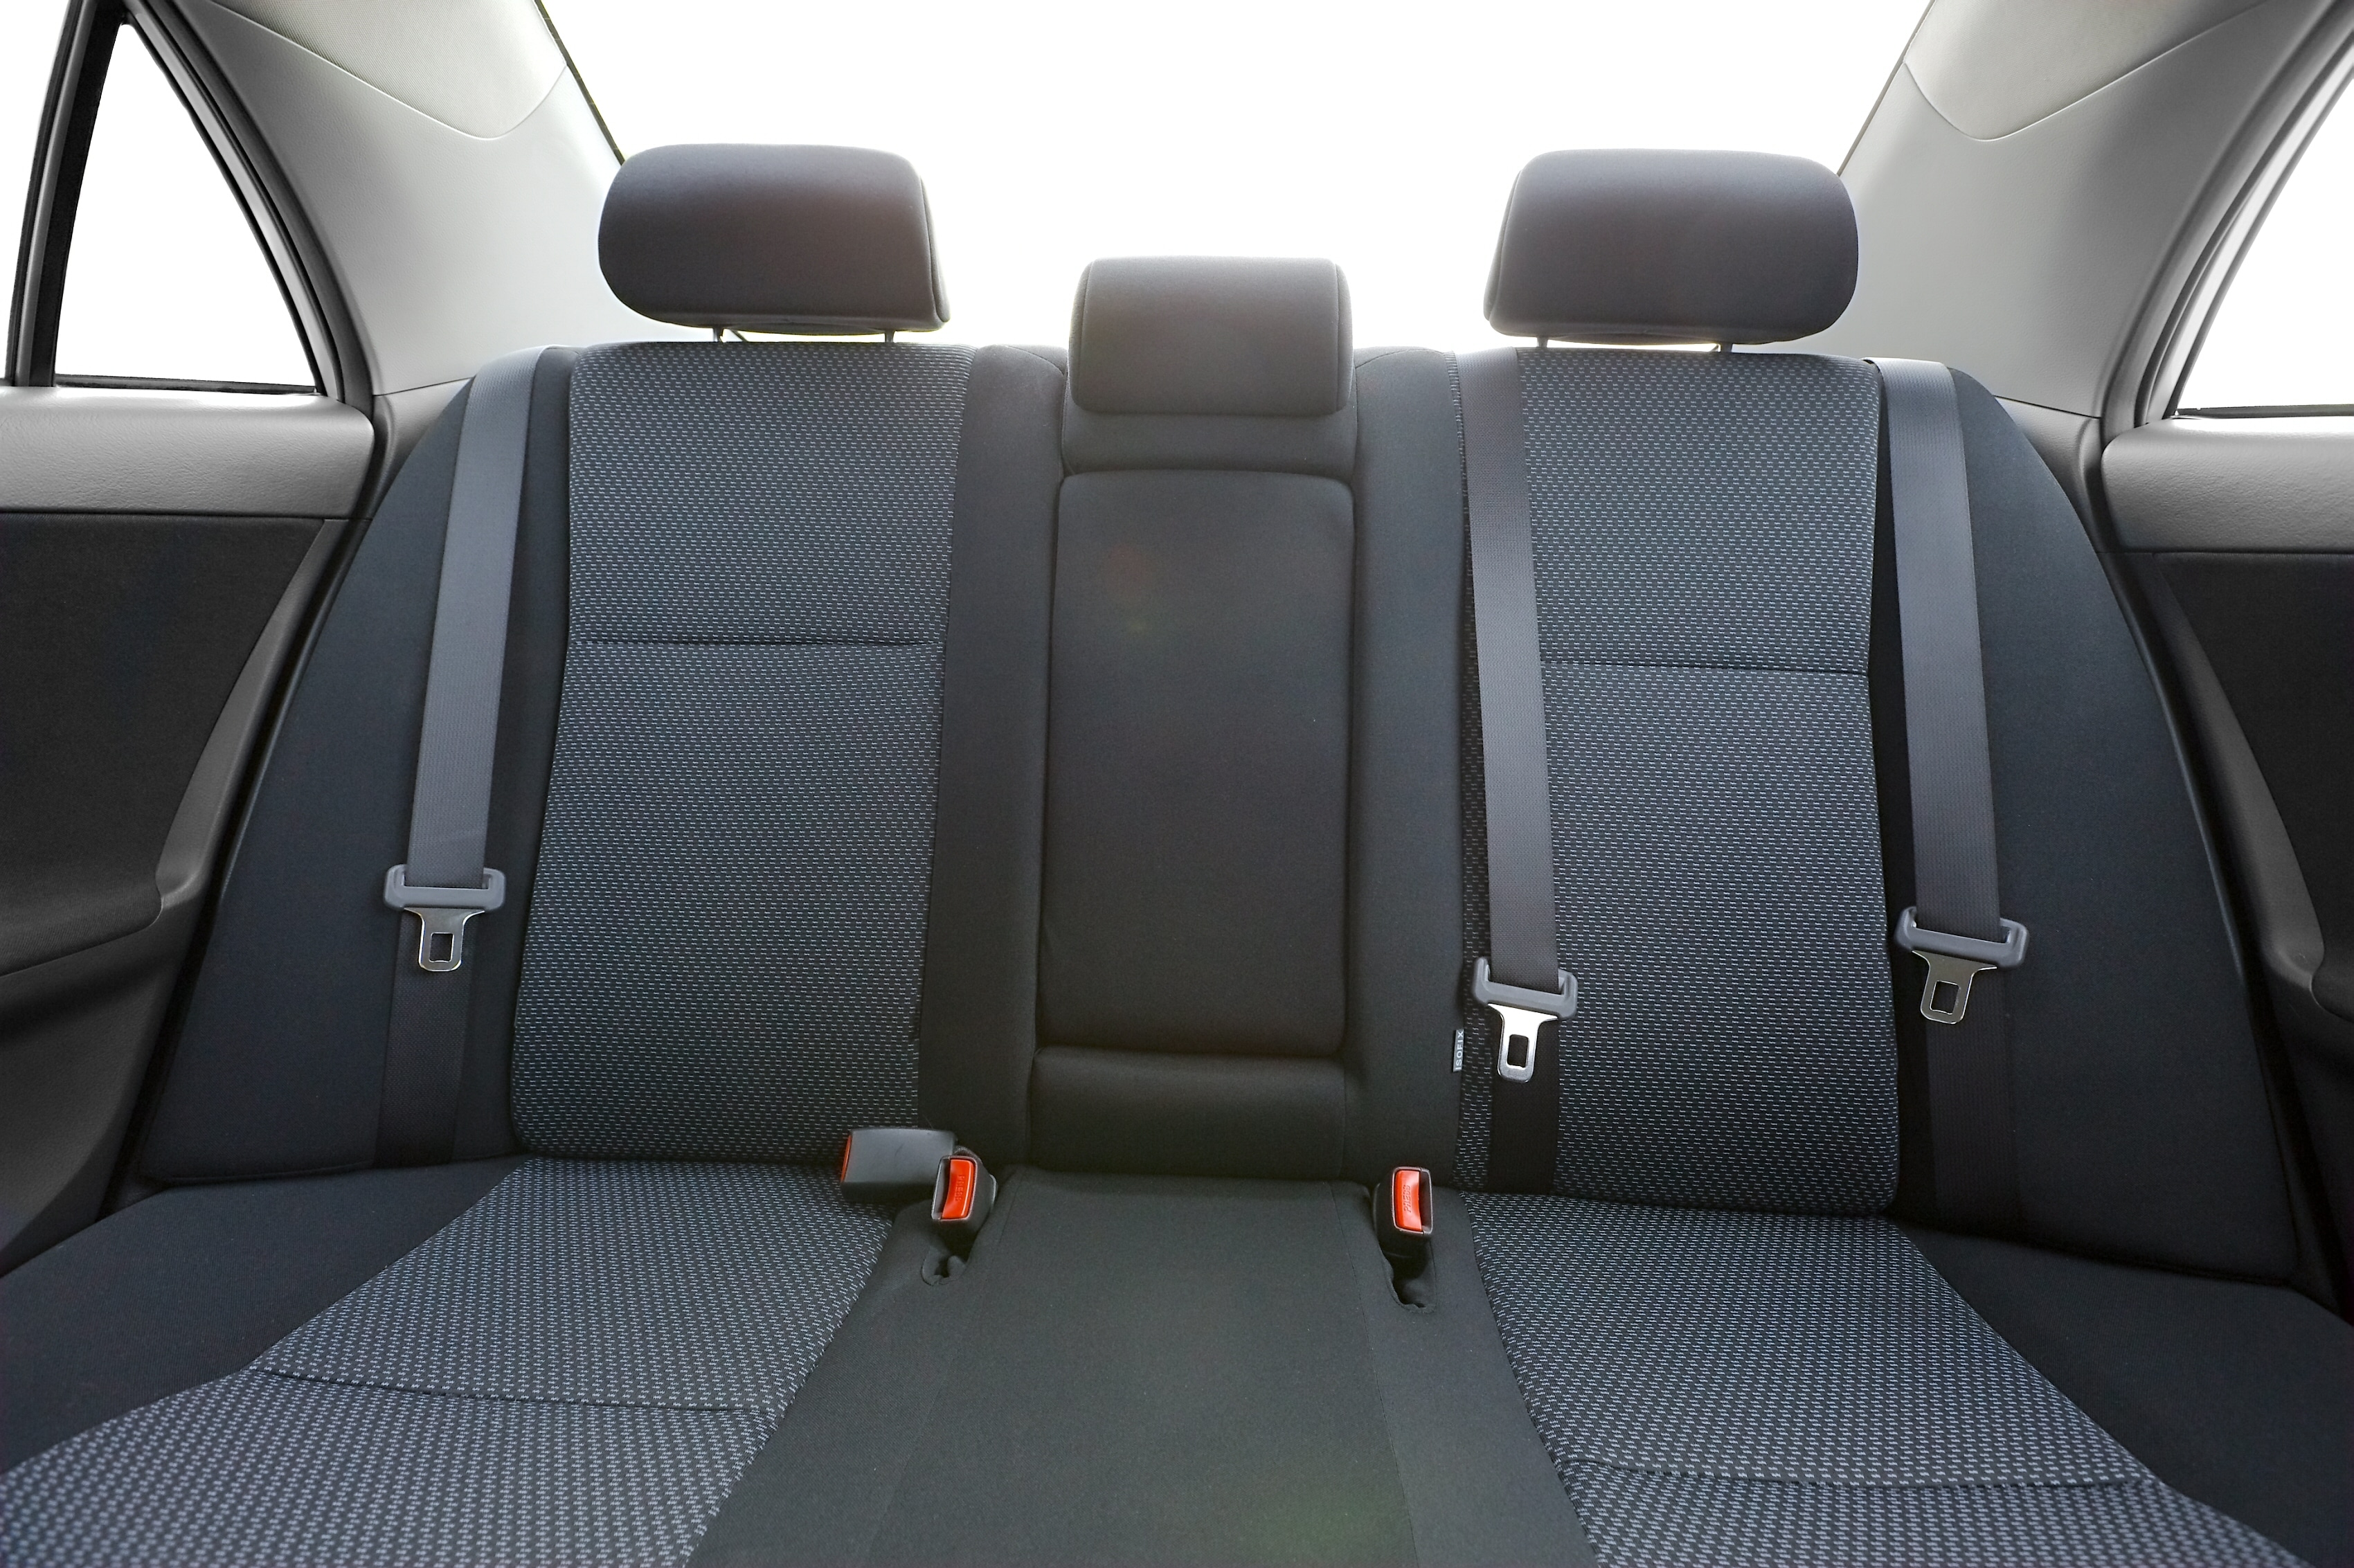 The Insurance Institute of Highway Safety Wants Federal Regulators to Amend Vehicle Safety Standards for Backseat Seatbelts